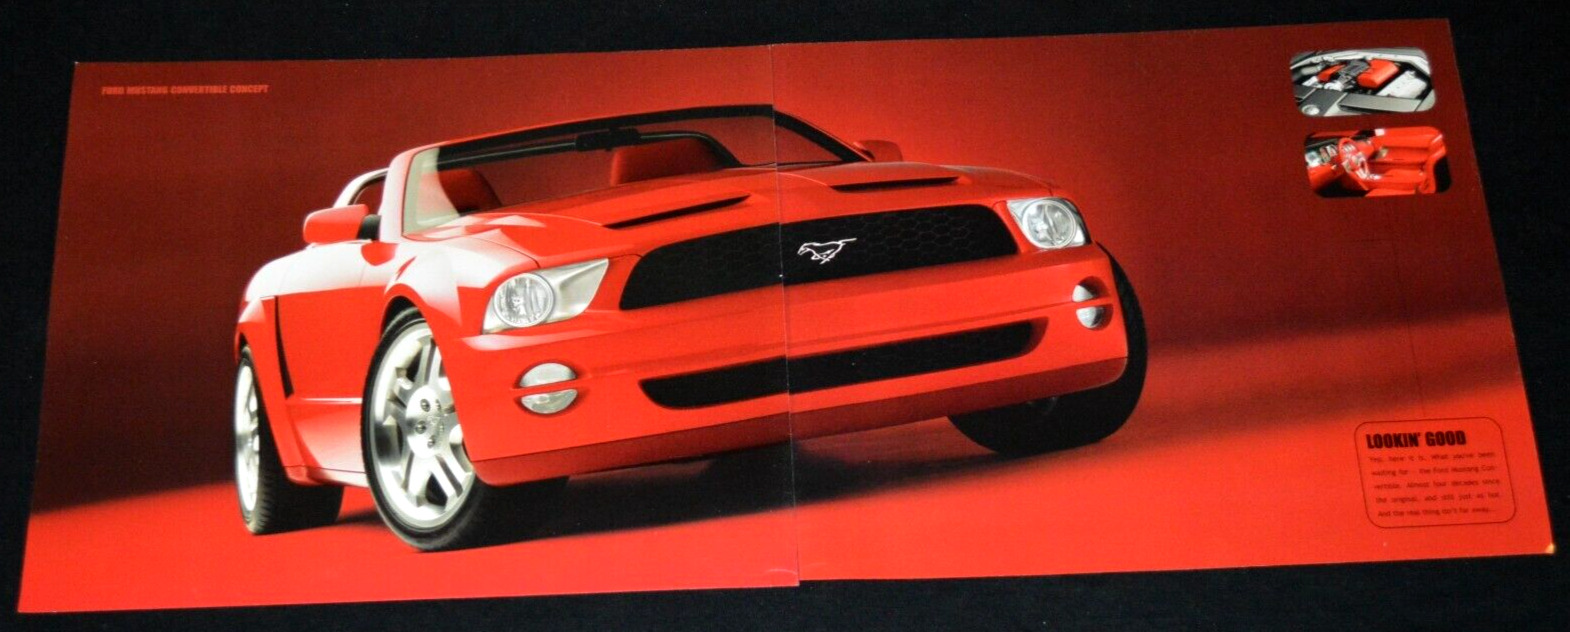 2004 FORD 100 YEAR MUSTANG CONCEPT ORIGINAL DEALER ADVERTISEMENT PRINT AD-04